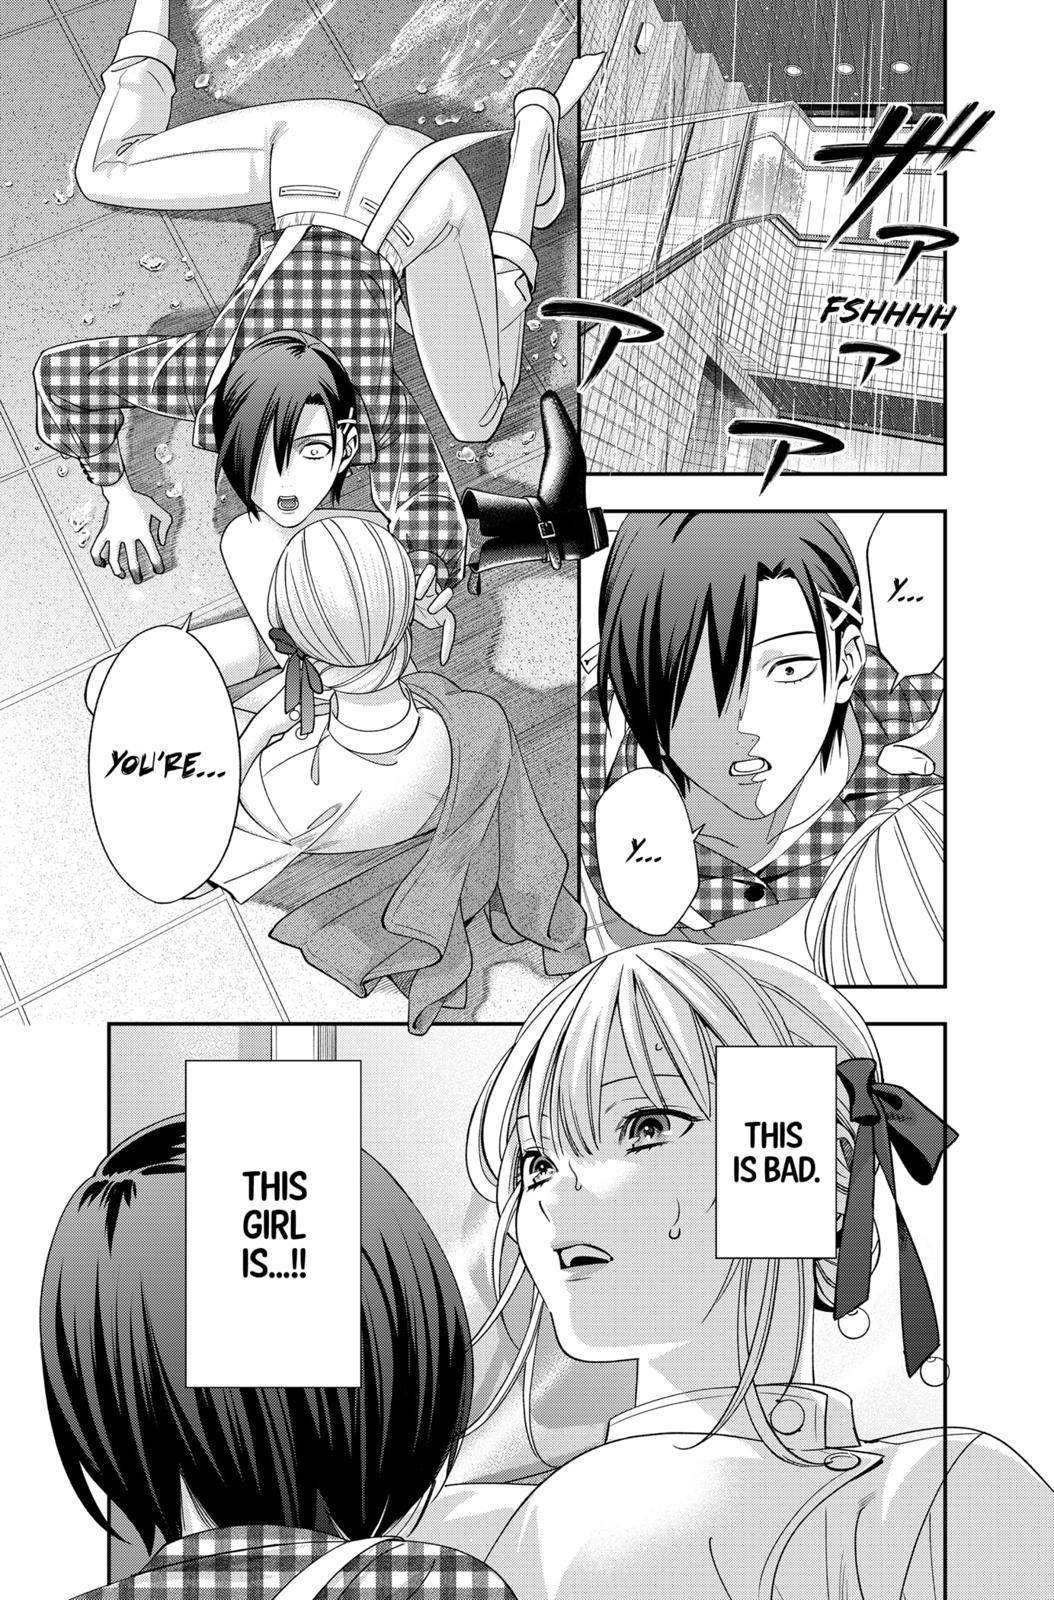 Dentist-San, Your Boobs Are Touching Me! - chapter 14 - #1